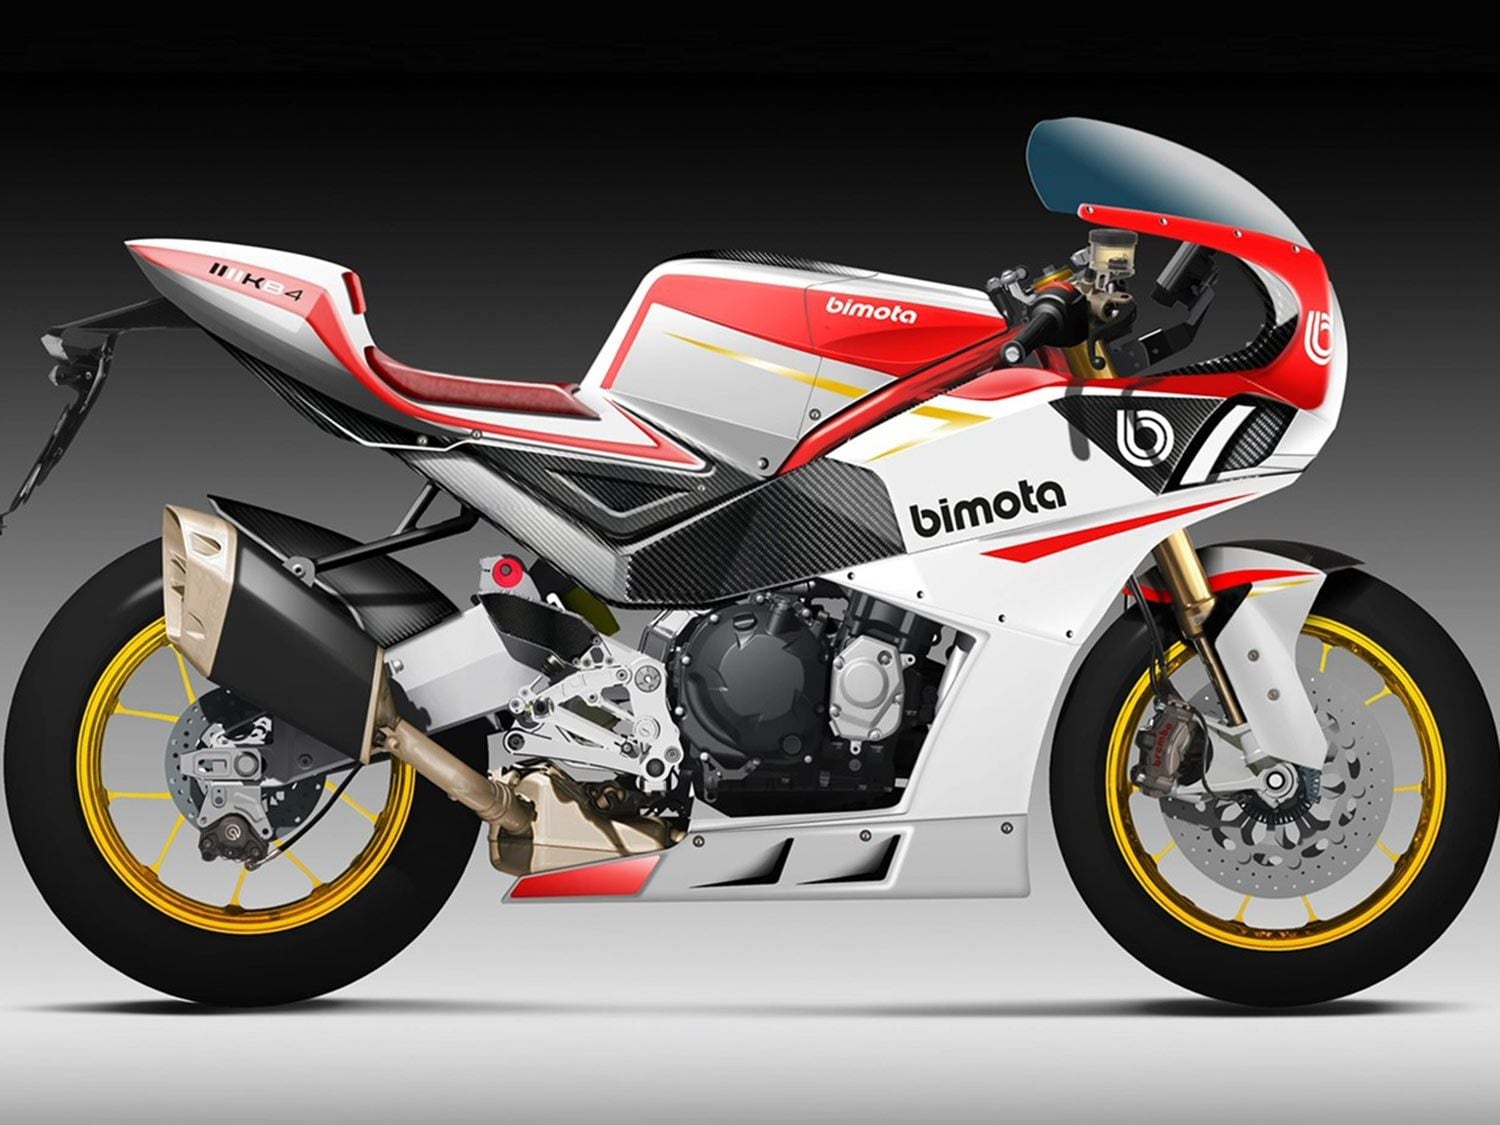 The latest on Bimota’s upcoming KB4 is that it will have a new chassis with a shorter wheelbase but keep the Kawasaki powerplant as is.